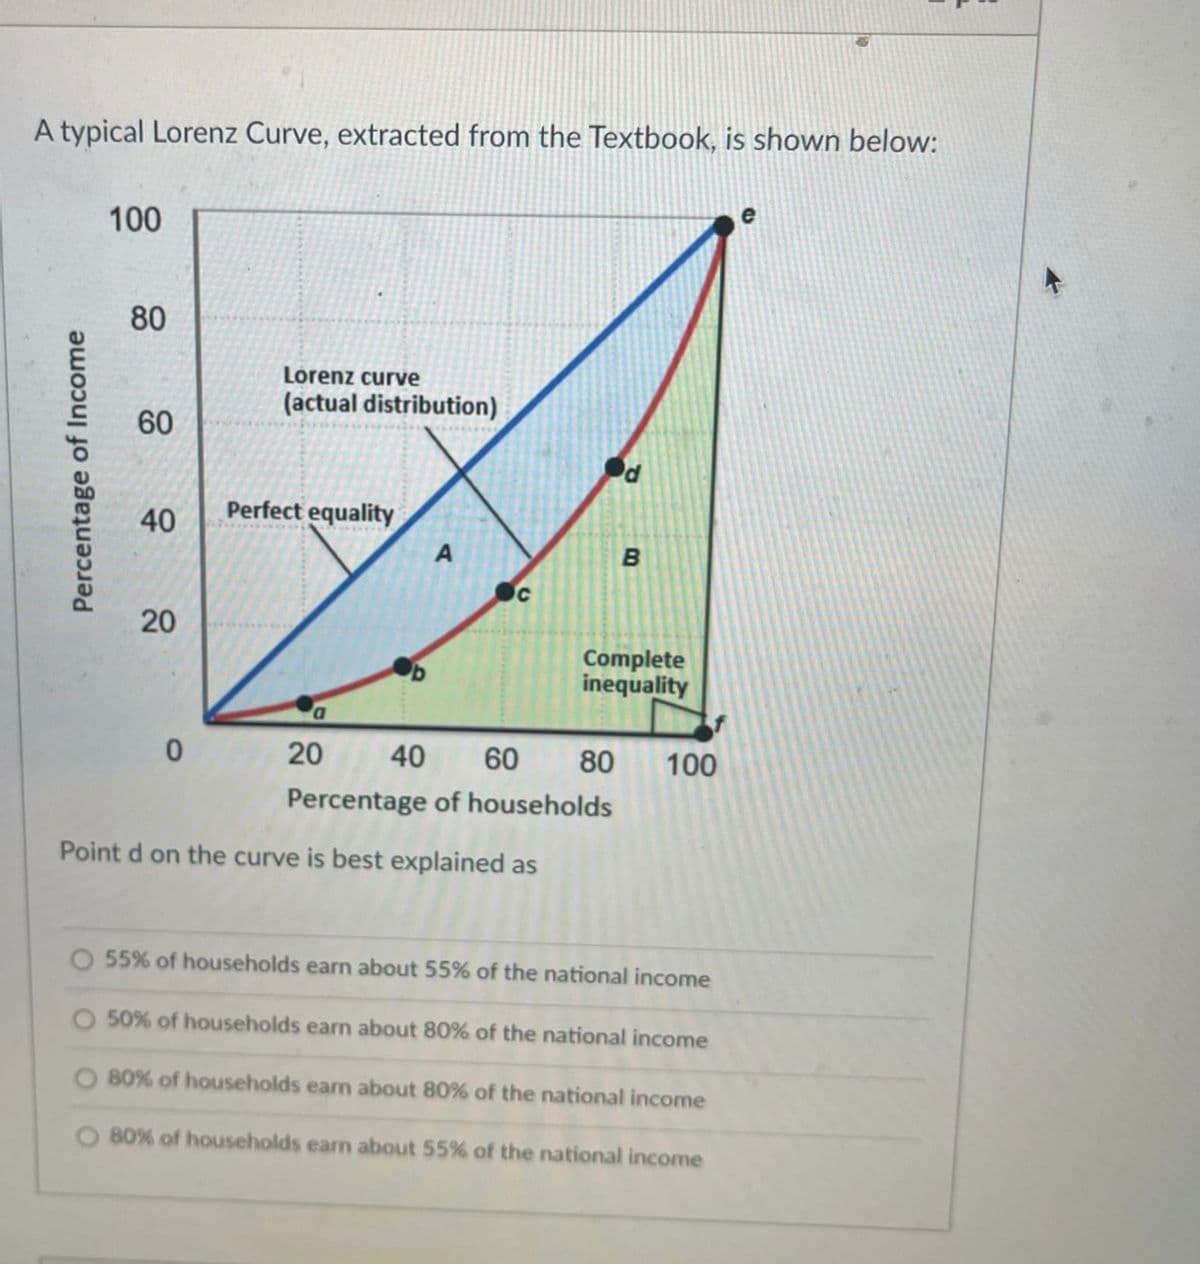 A typical Lorenz Curve, extracted from the Textbook, is shown below:
e
100
Lorenz curve
(actual distribution)
60
Perfect equality
40
B
20
Complete
inequality
D
0 20
40
60
80
100
Percentage of households
Point d on the curve is best explained as
55% of households earn about 55% of the national income
50% of households earn about 80% of the national income
80% of households earn about 80% of the national income
80% of households earn about 55% of the national income
Percentage of Income
80
